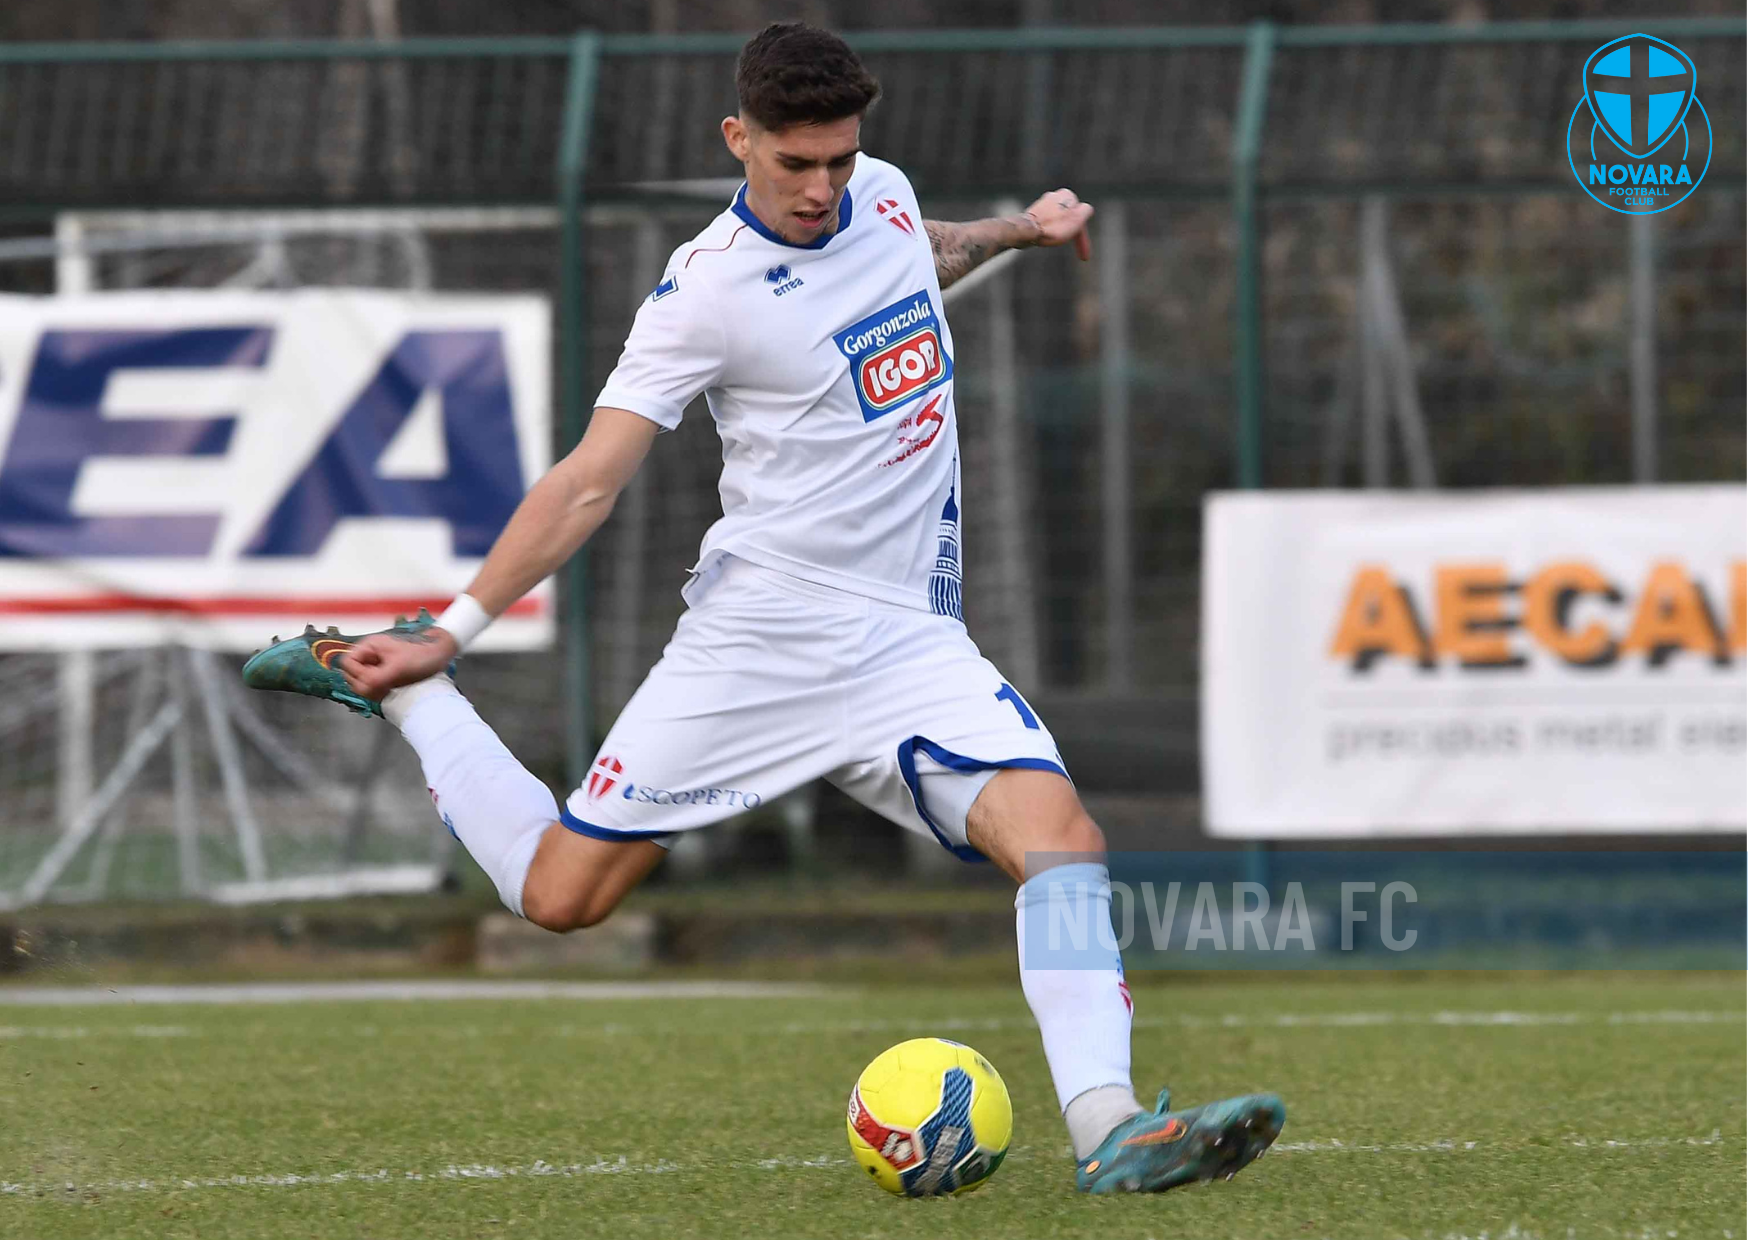 Read more about the article Renate-Novara 1-0 | Gallery